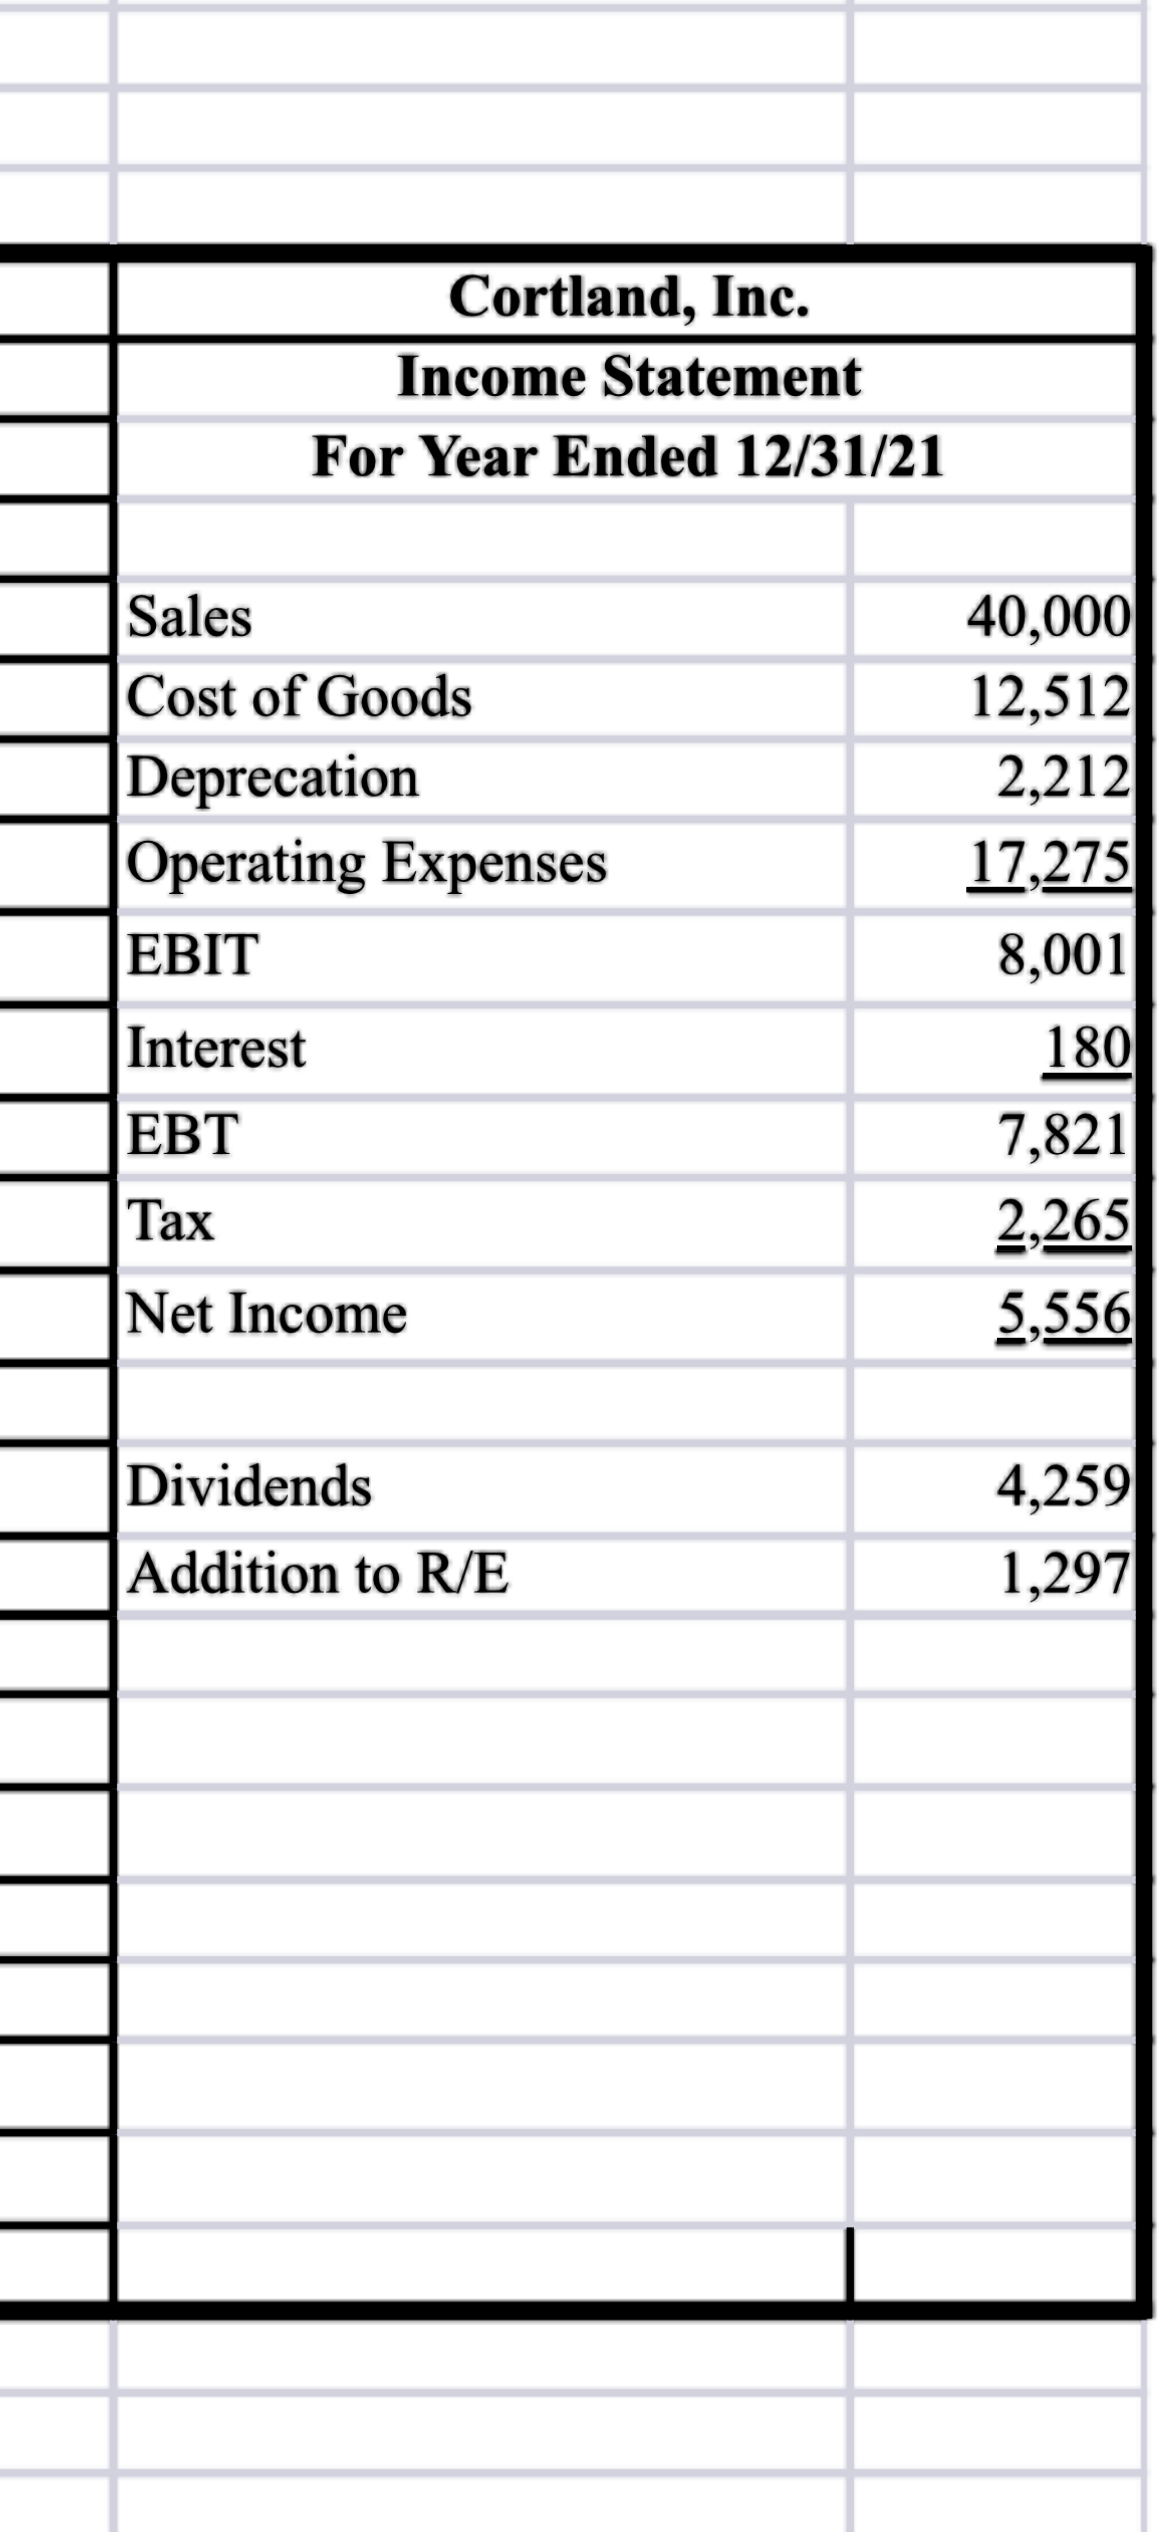 Cortland, Inc.
Income Statement
For Year Ended 12/31/21
Sales
Cost of Goods
Deprecation
Operating Expenses
EBIT
Interest
EBT
Tax
Net Income
Dividends
Addition to R/E
40,000
12,512
2,212
17,275
8,001
180
7,821
2,265
5,556
4,259
1,297